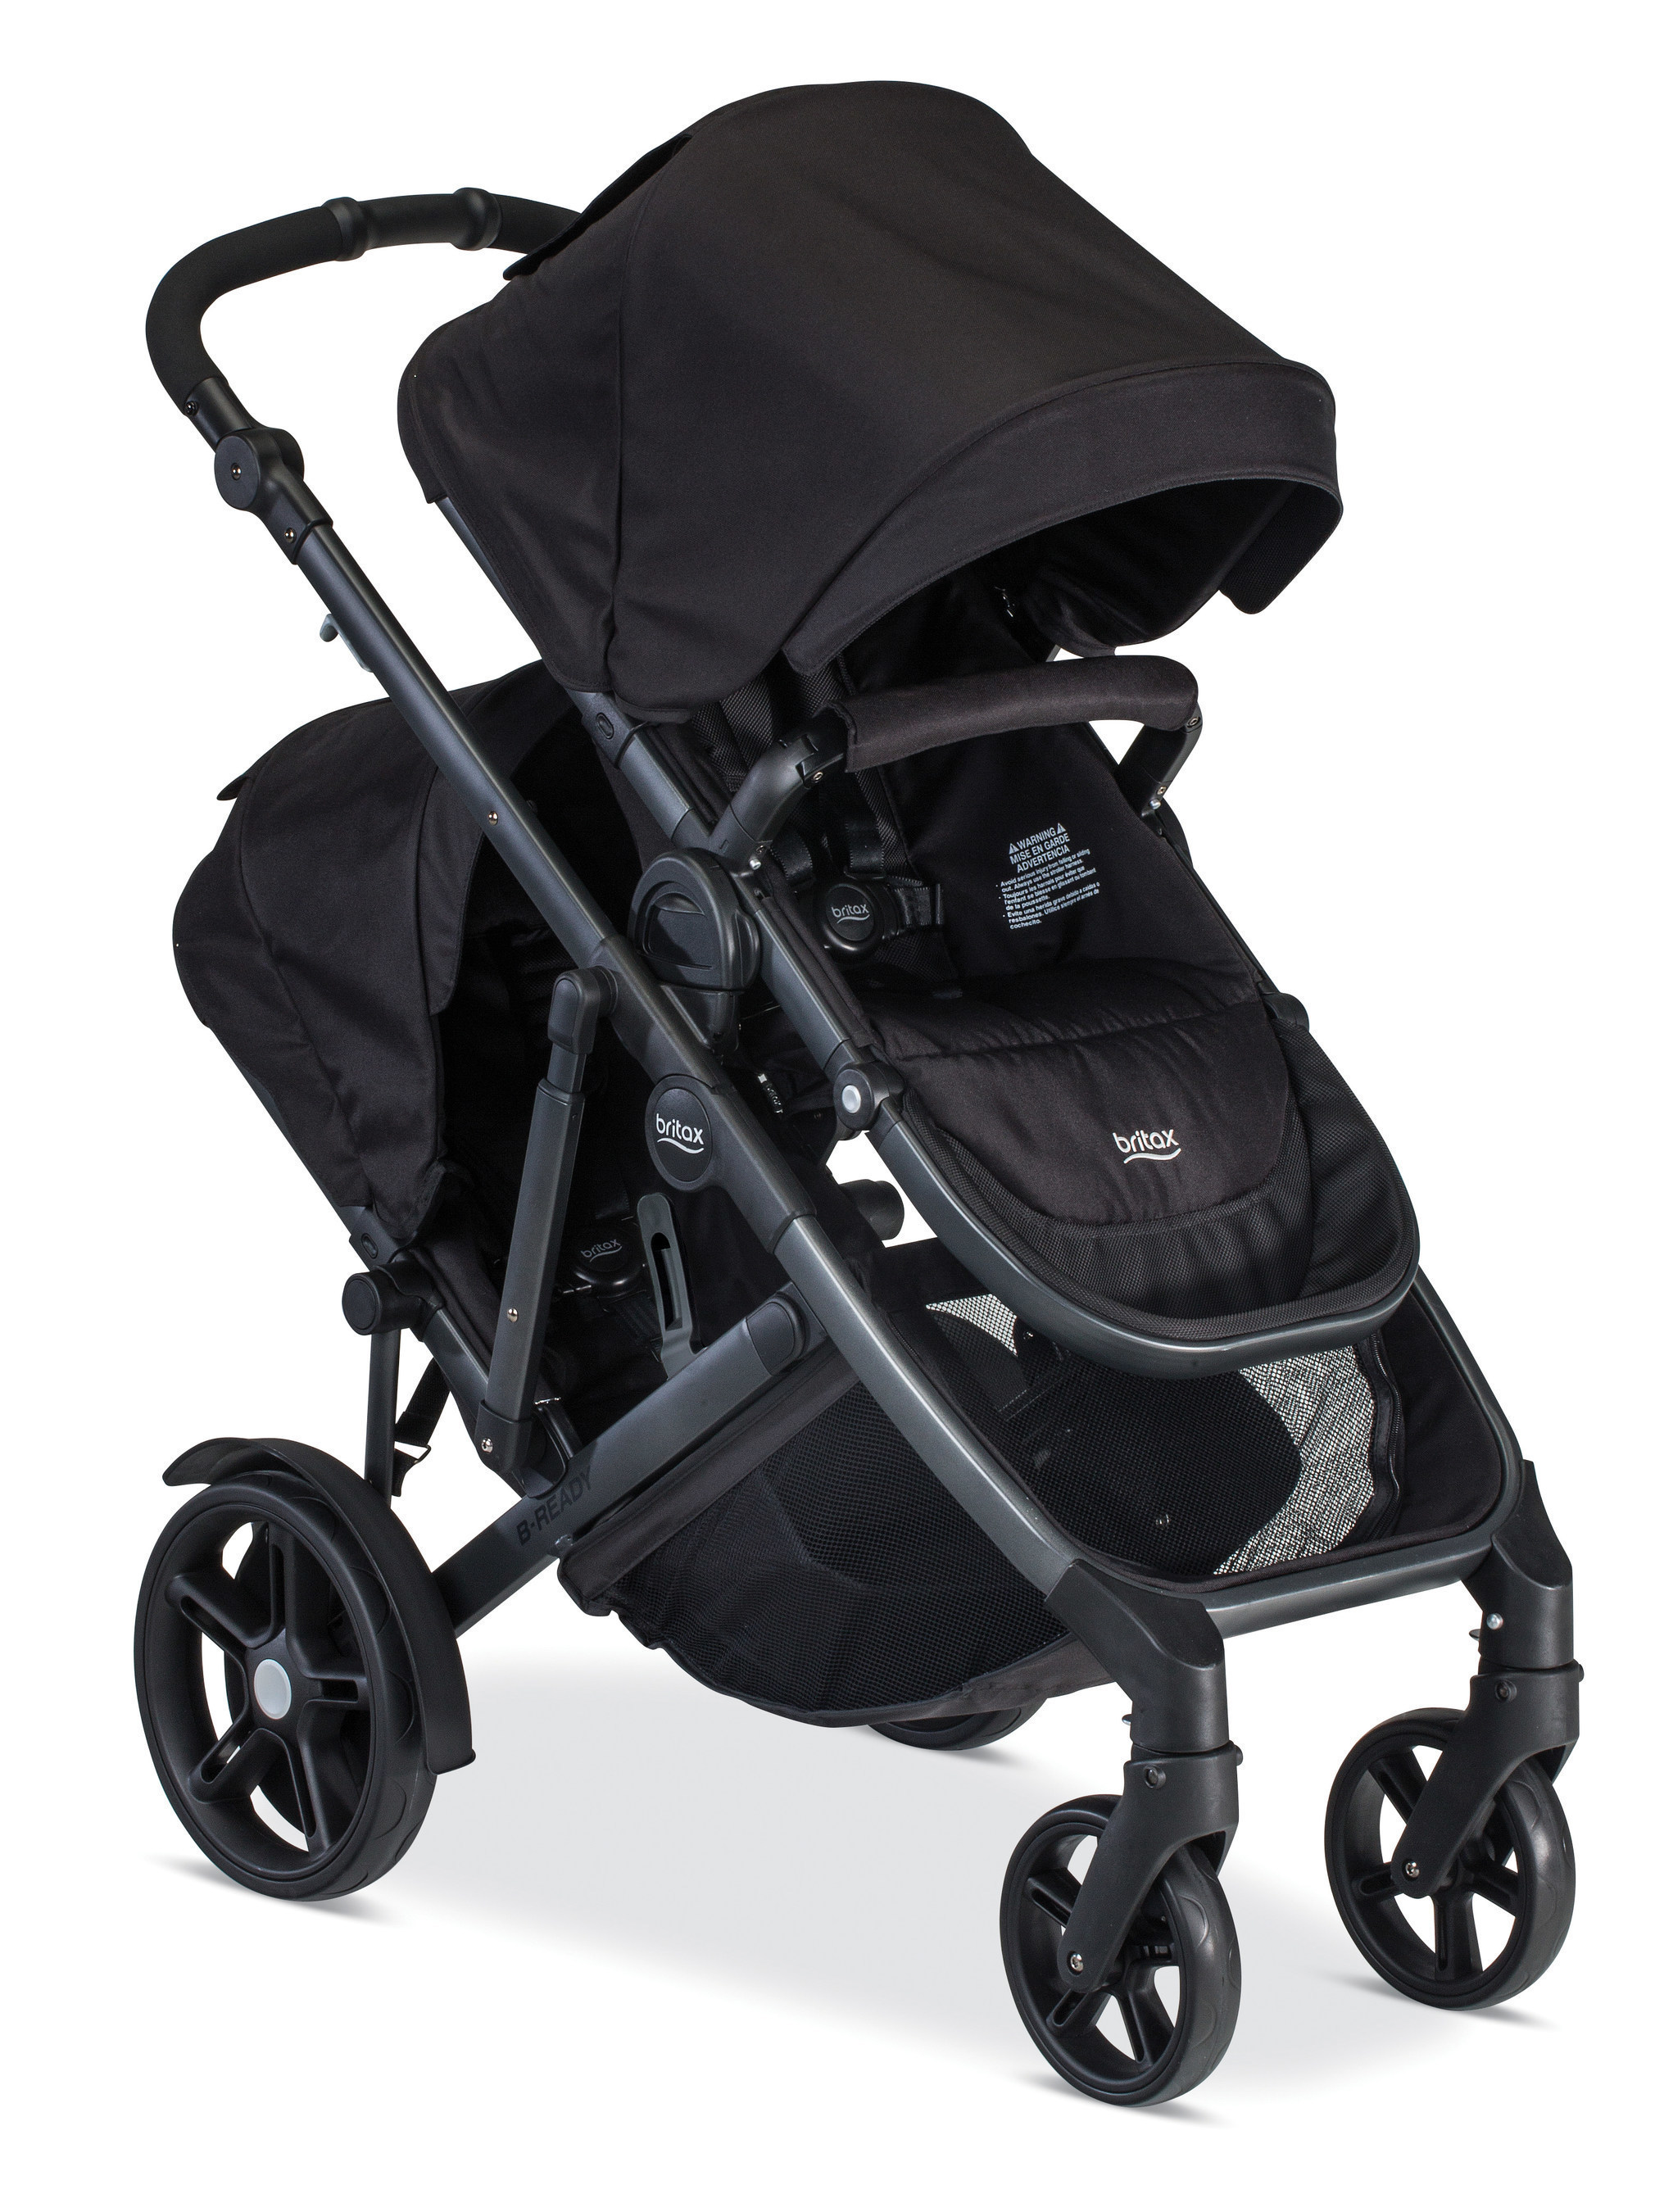 2017 Britax B-Ready With Second Seat